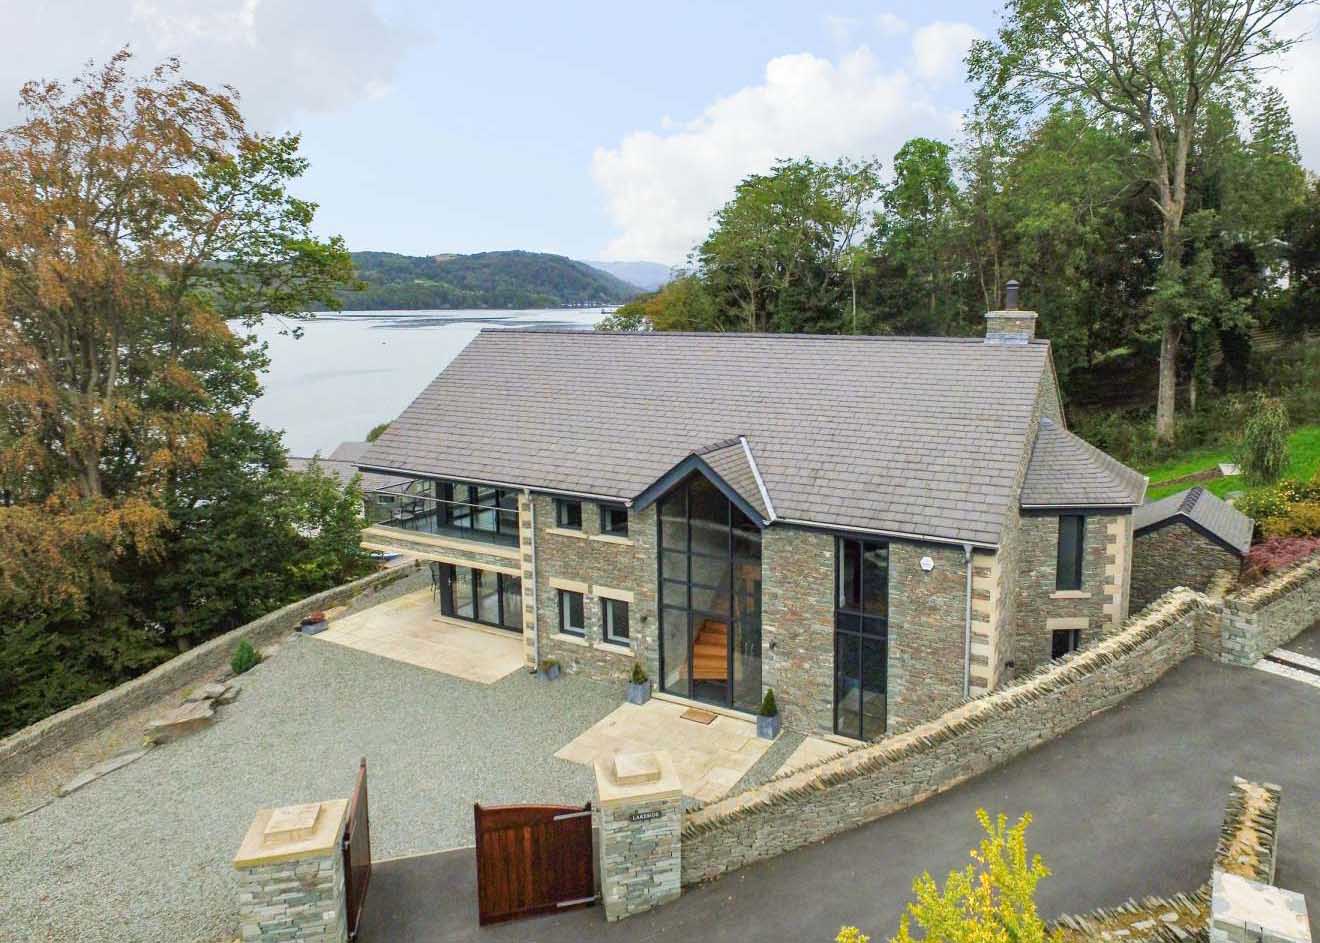 Lakeside property with views of lake windermere - luxury accomodation in Bowness